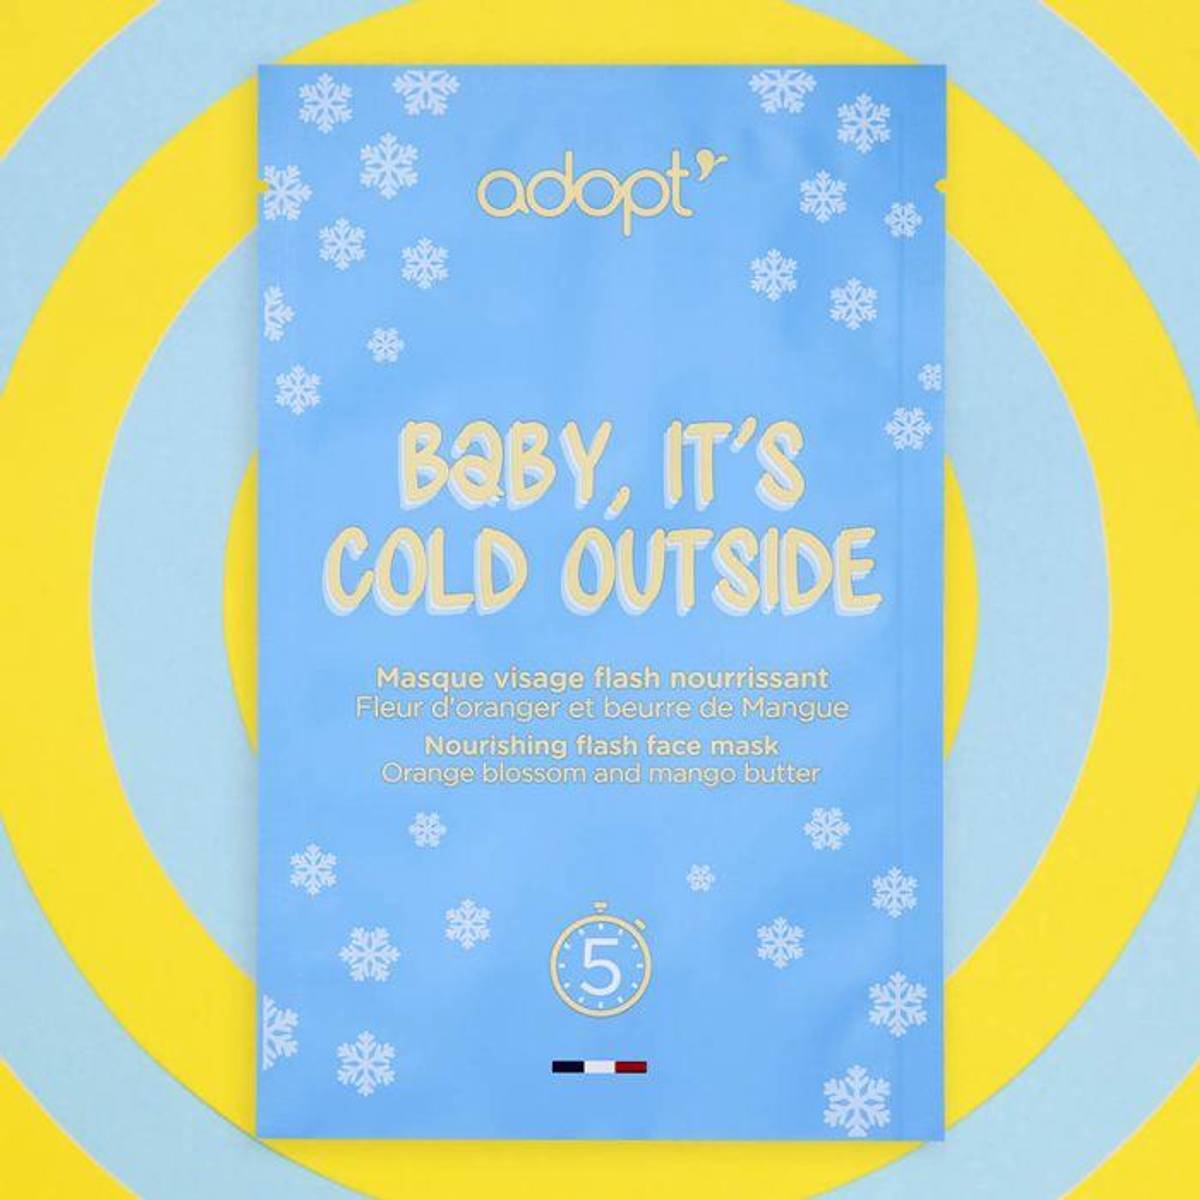 SHEET MASK "BABY ITS COLD OUTSIDE" - ADOPT